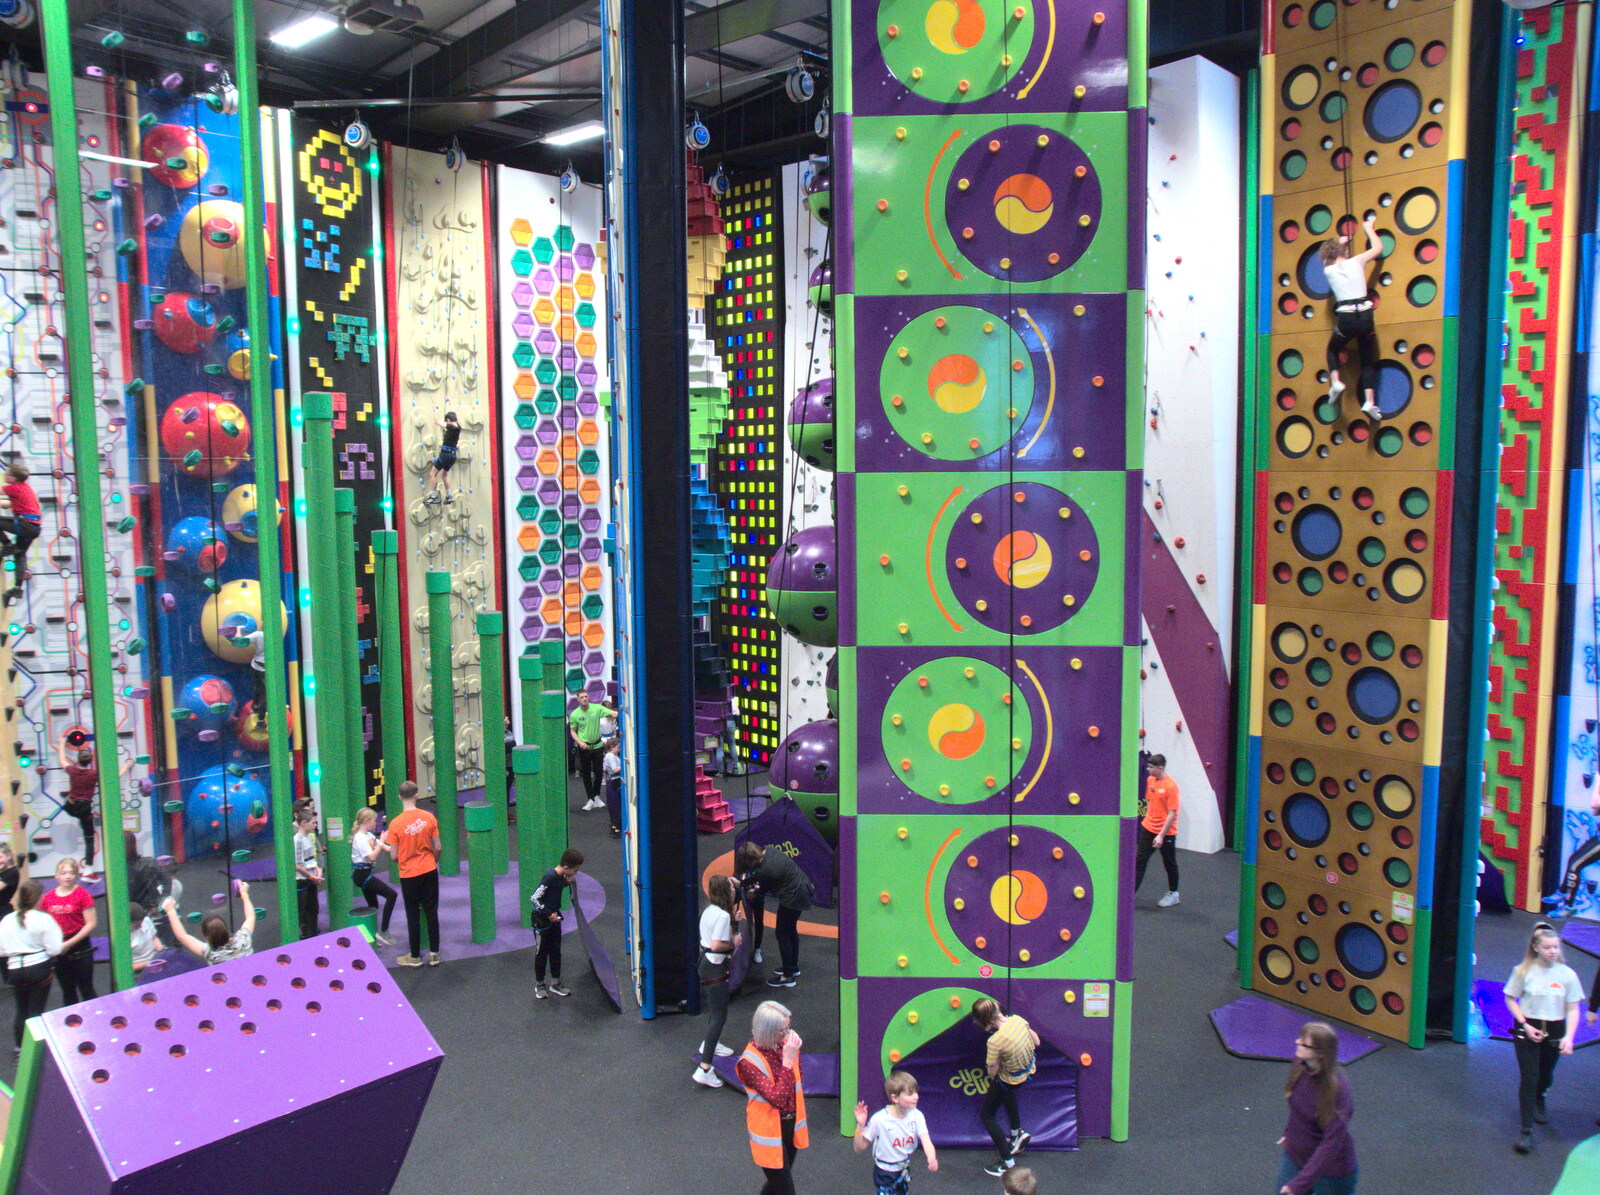 The climbing walls of Clip 'n' Climb from Clip and Climb, The Havens, Ipswich - 15th February 2020